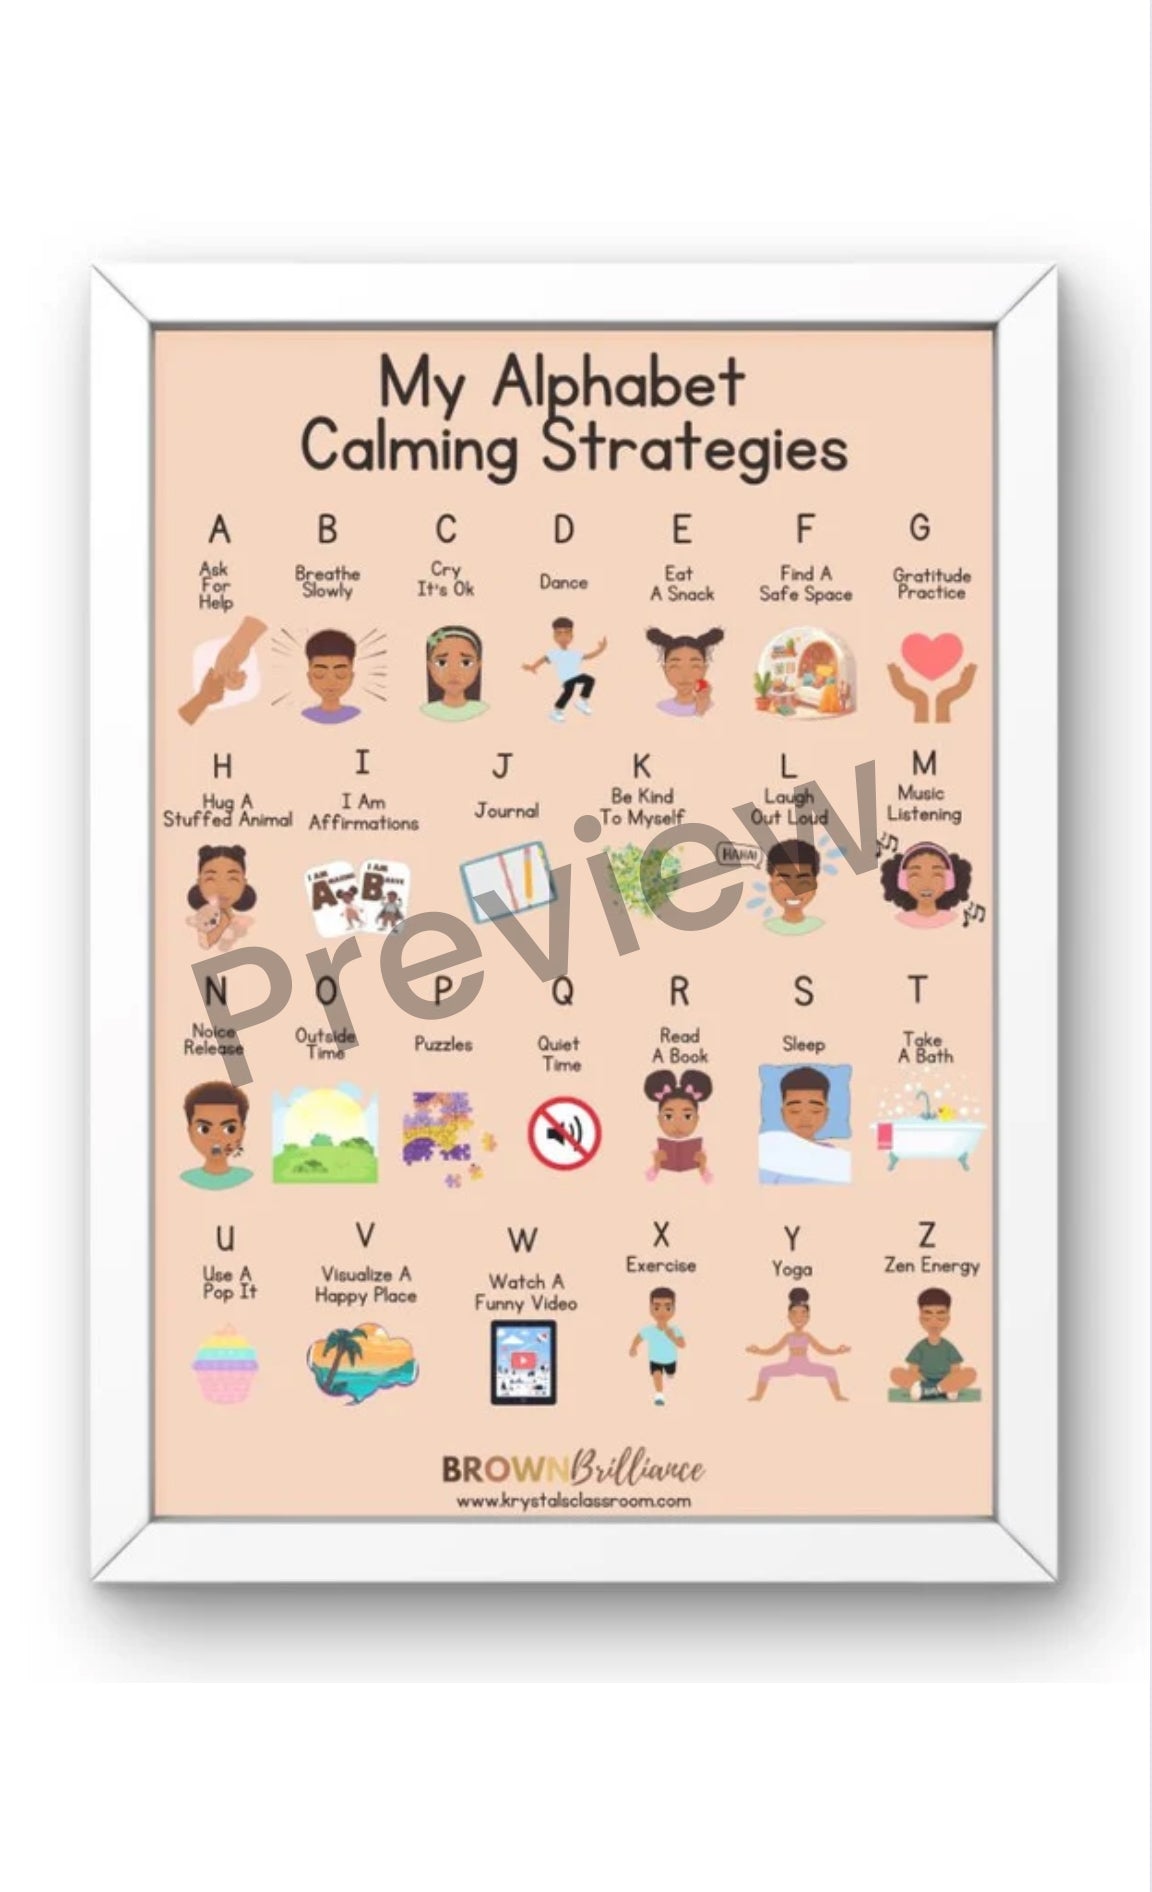 A-Z Calming Strategies Poster